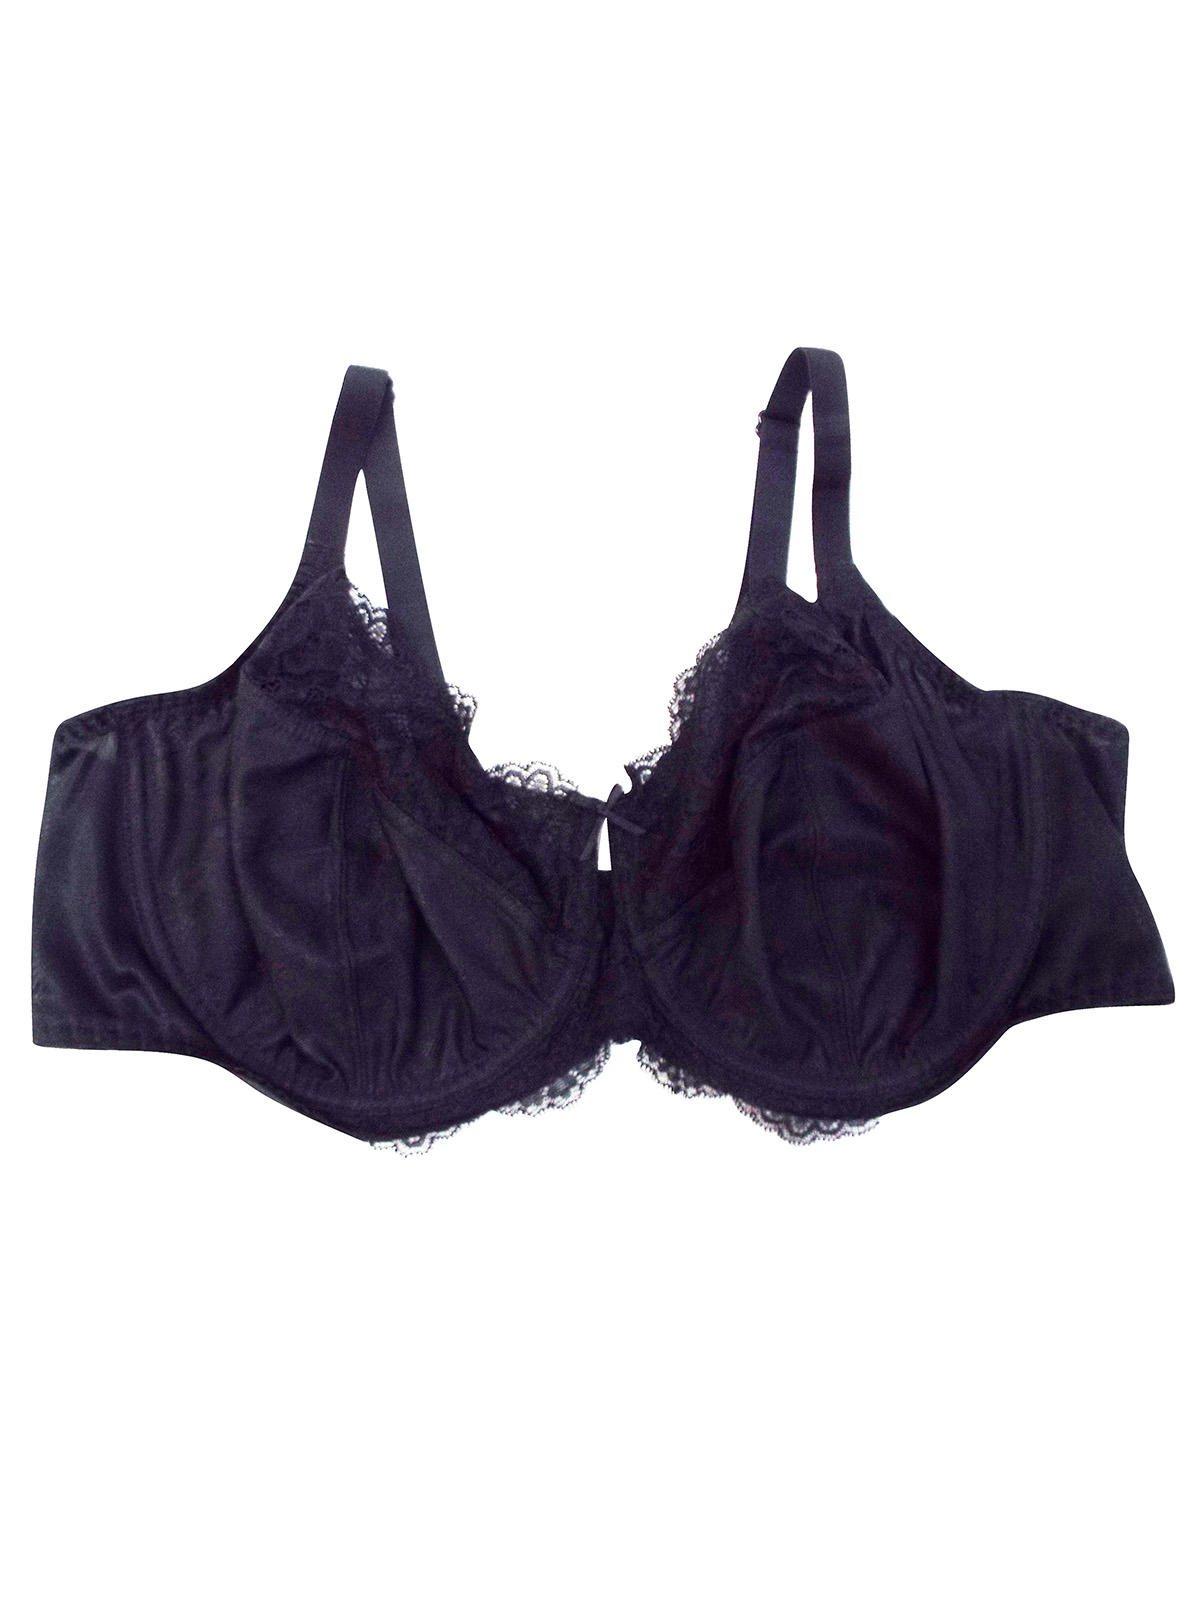 Marks and Spencer - - M&5 BLACK Fleur Lace Non-Padded Full 